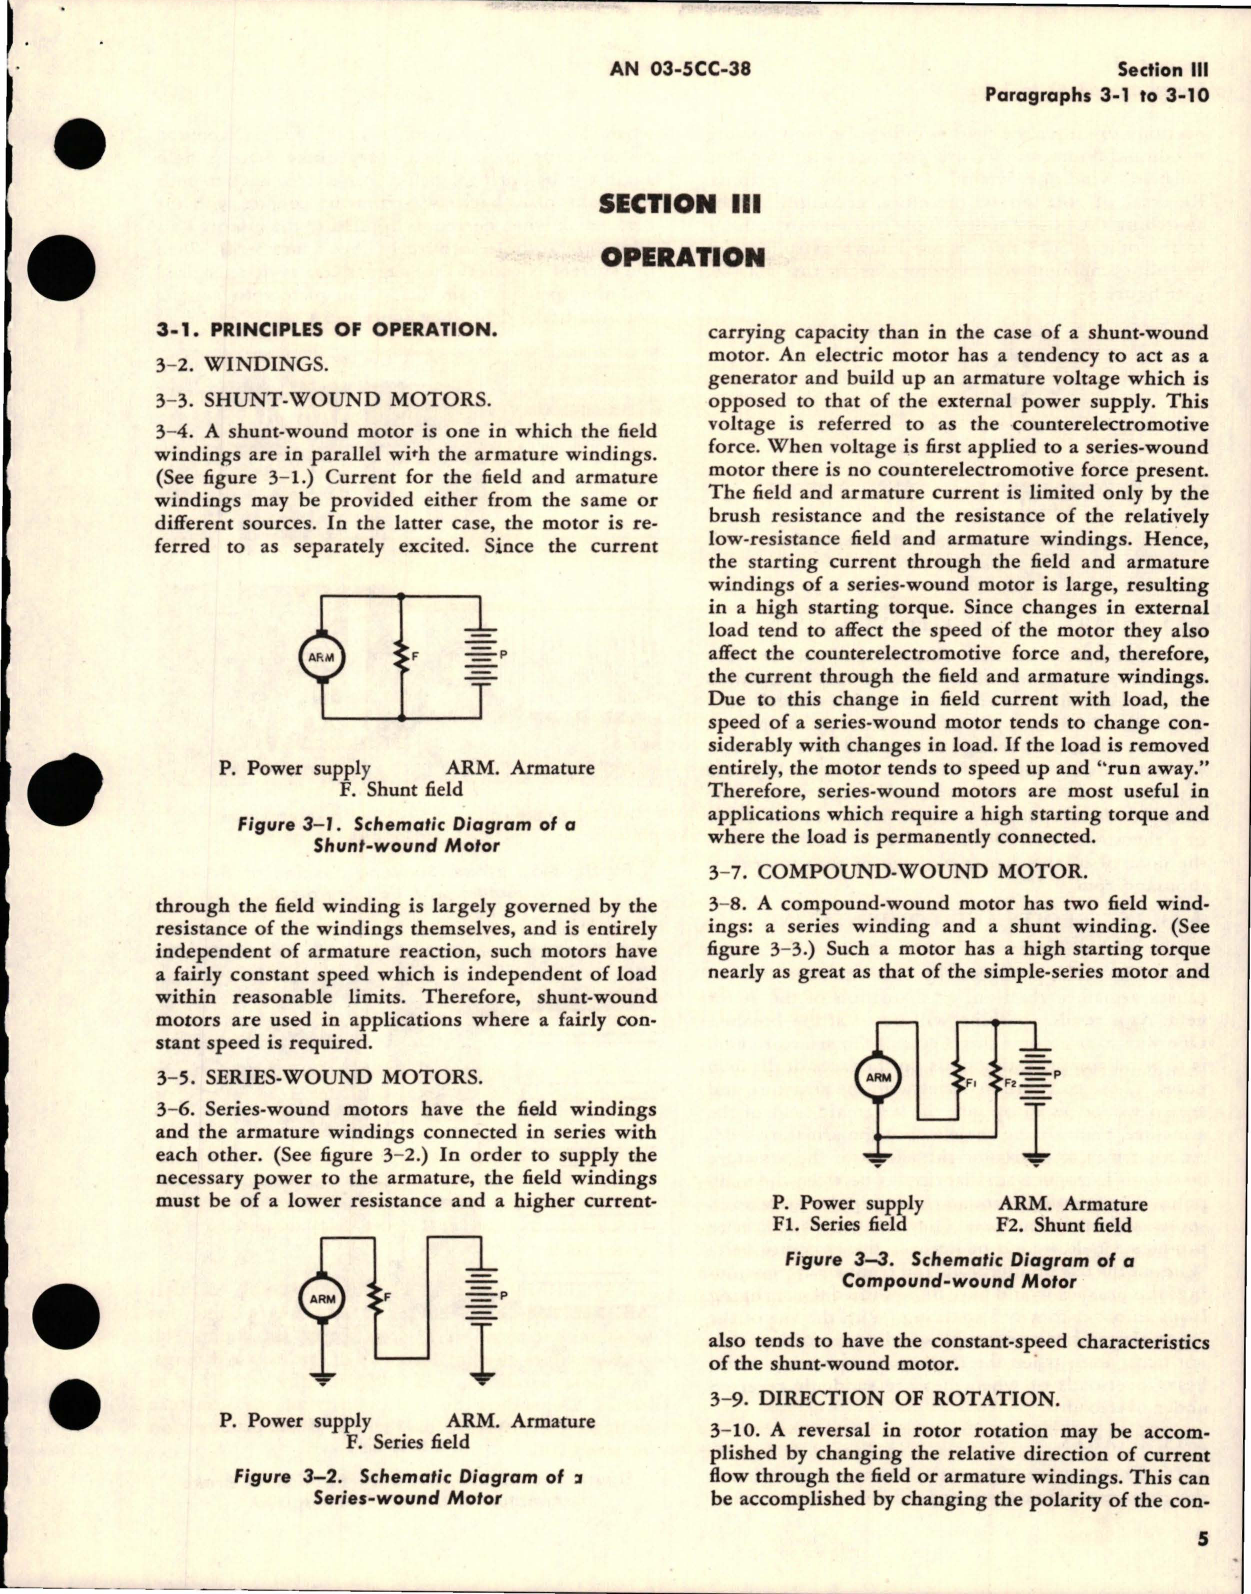 Sample page 9 from AirCorps Library document: Overhaul Instructions for Aircraft Motors - Series 5BC21 